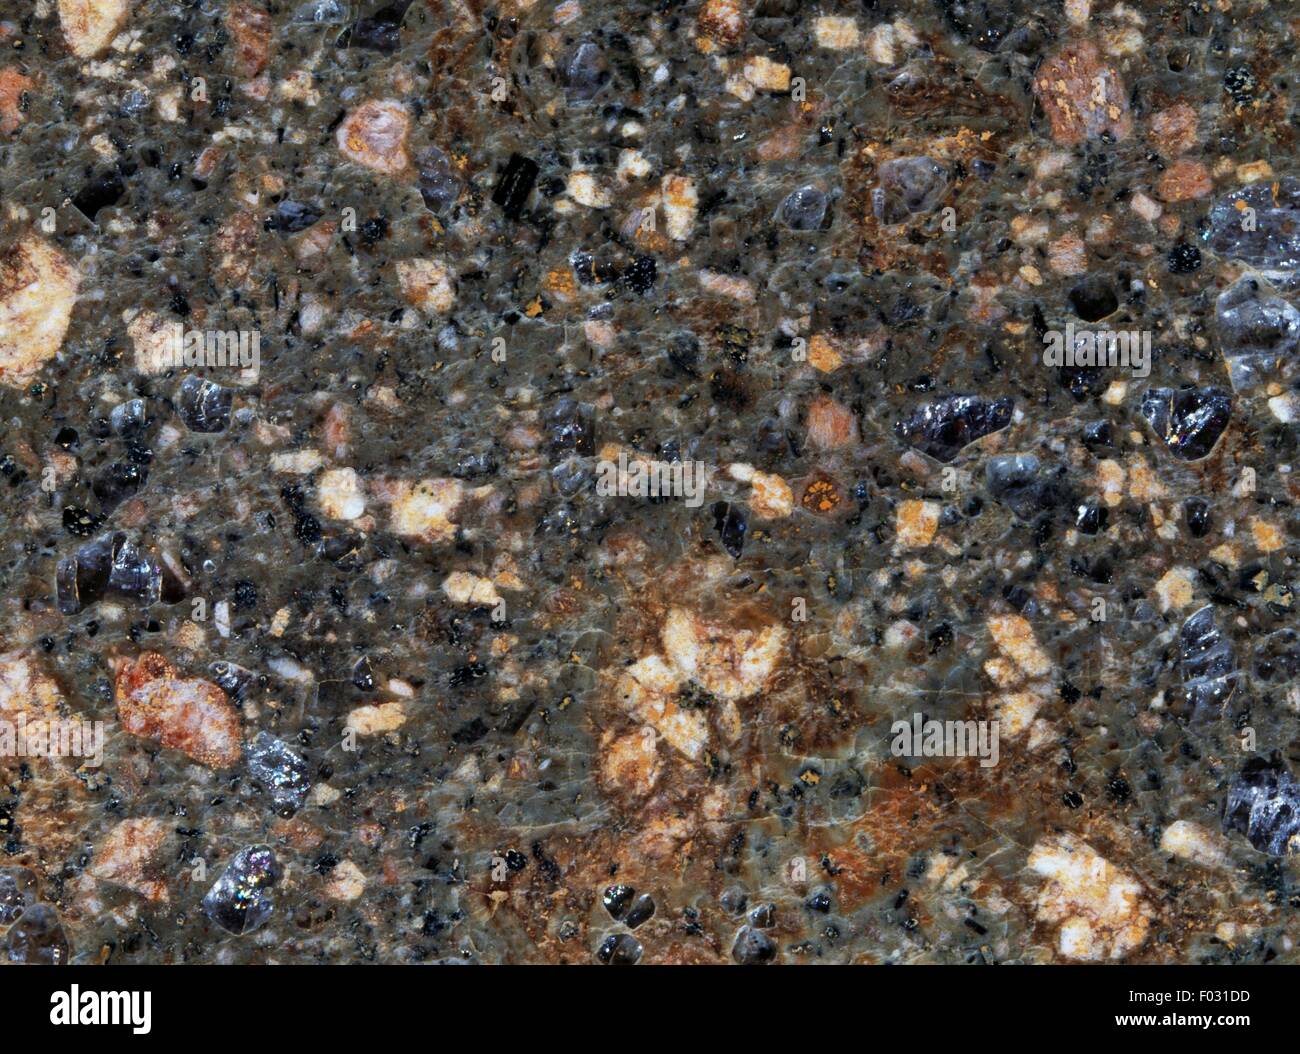 Red porphyry, igneous rock, from Egypt. Stock Photo